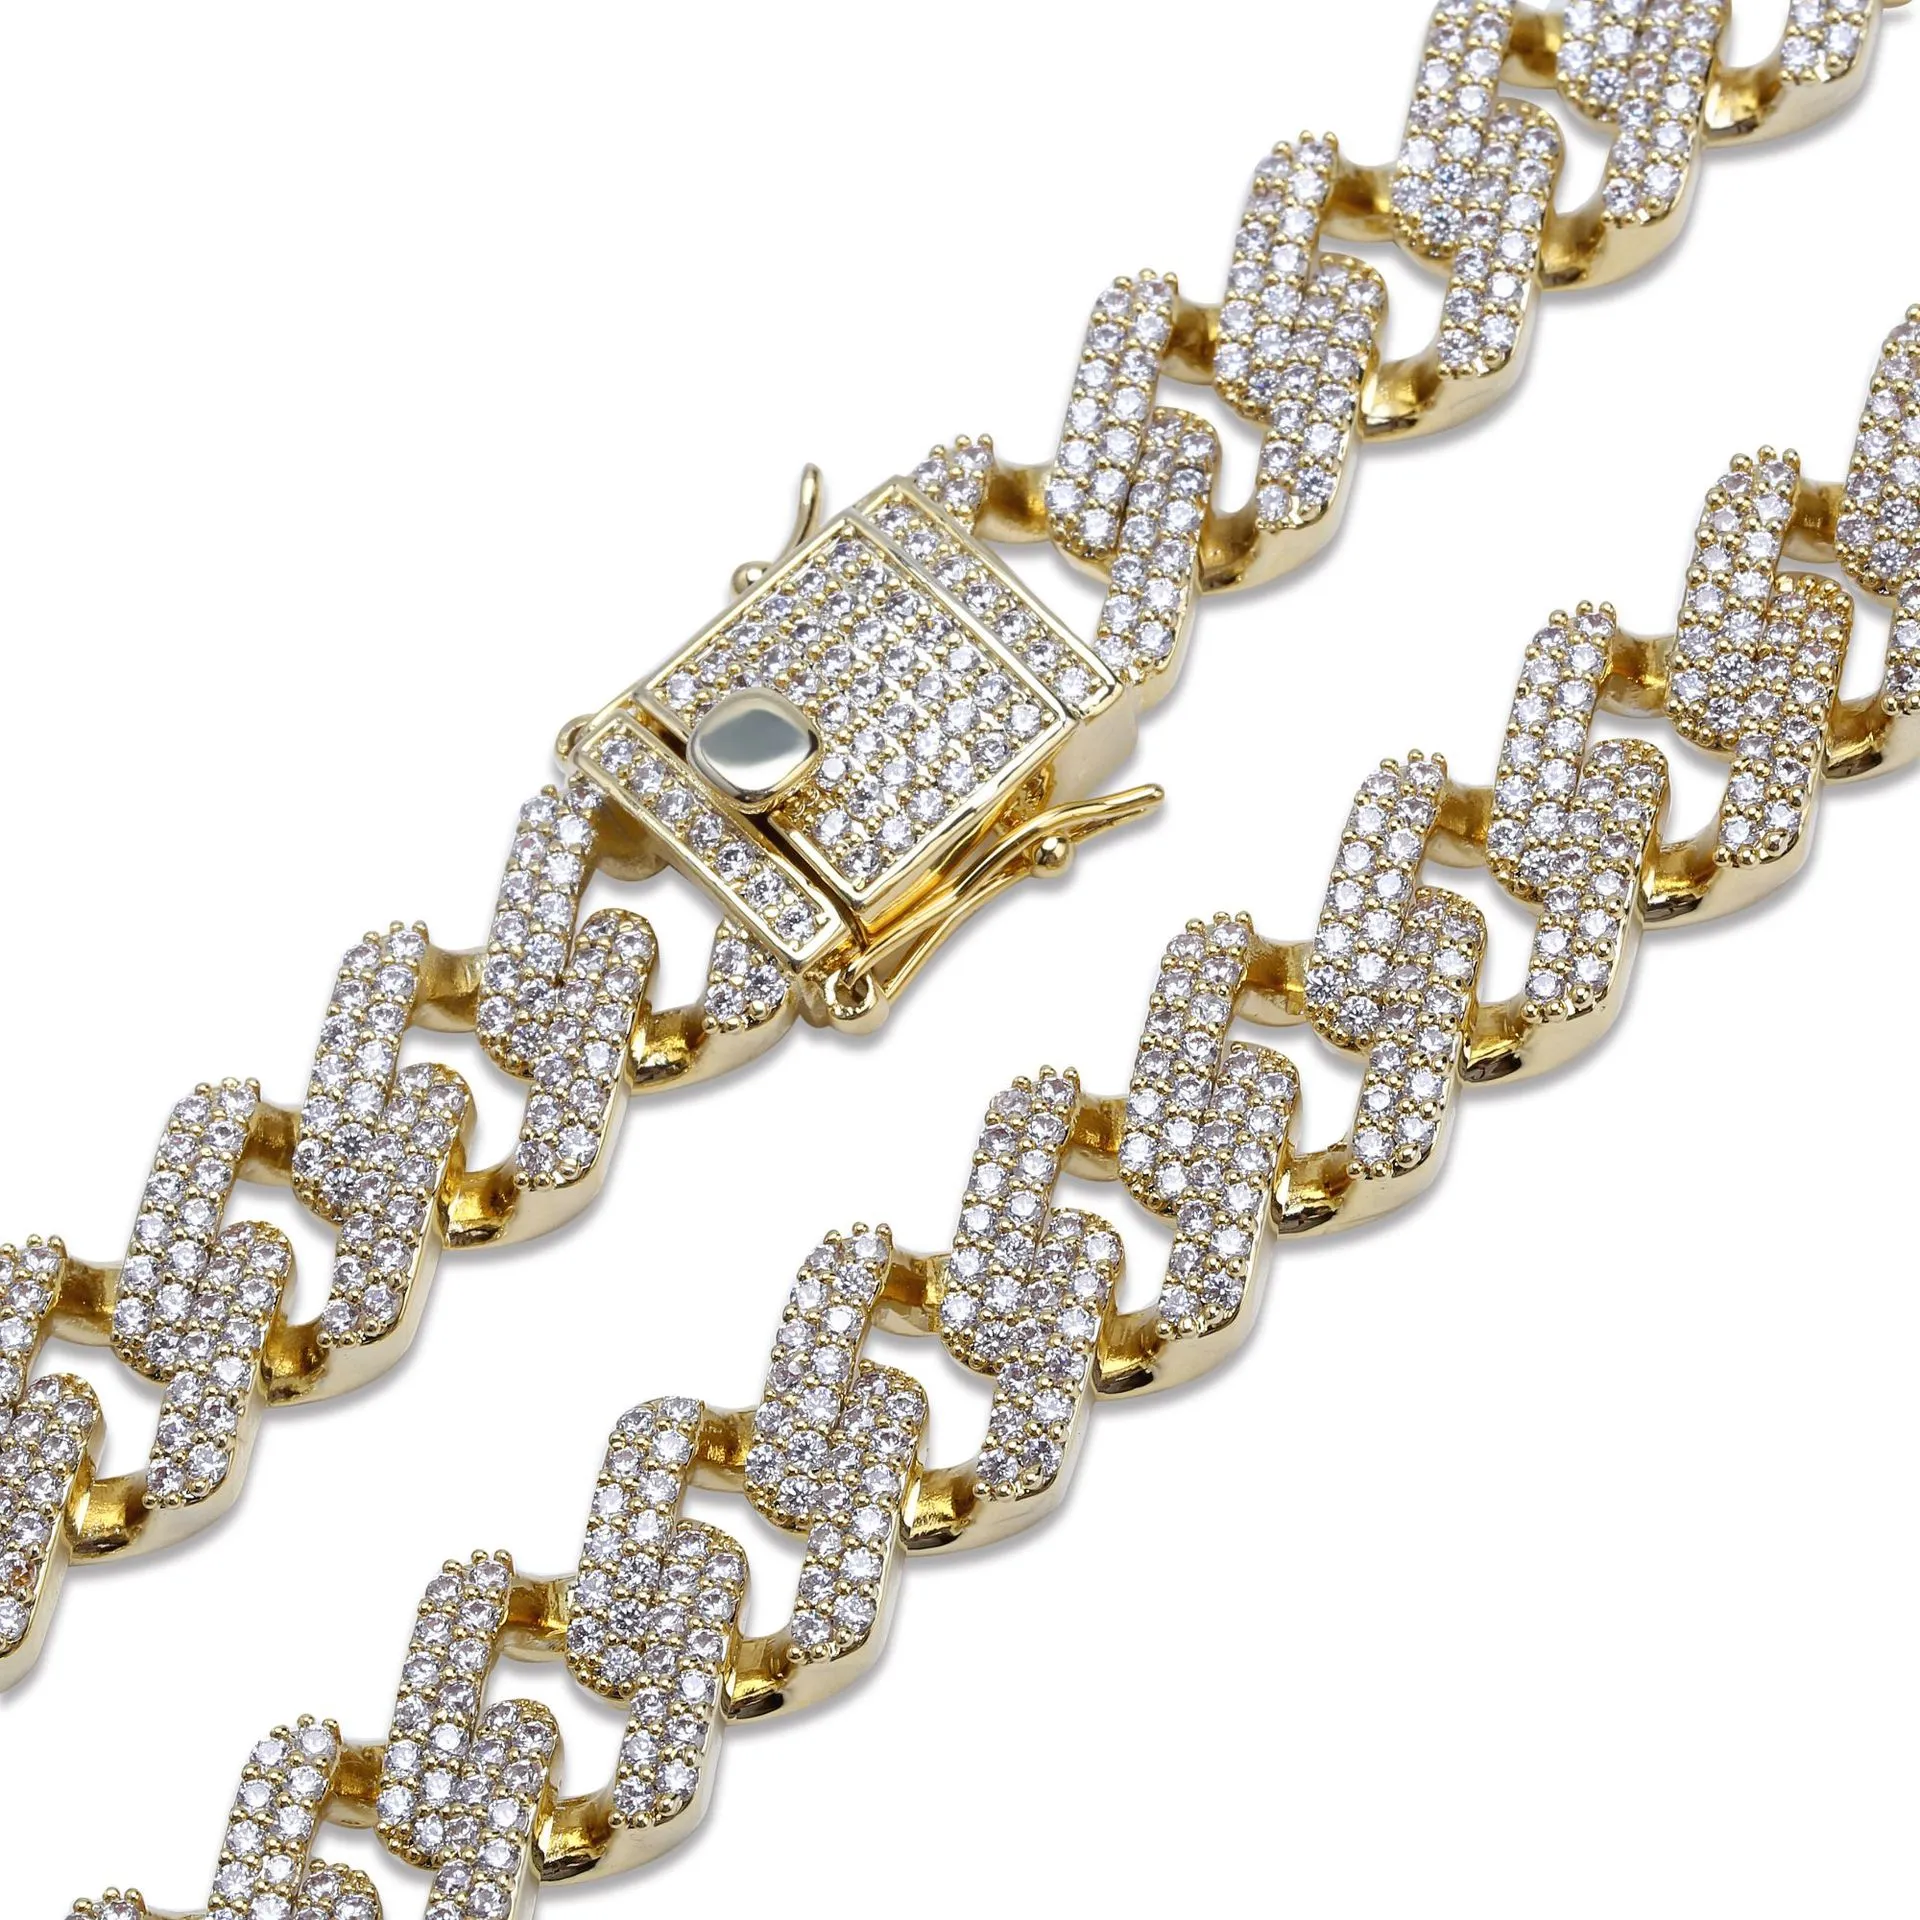 18K Gold Hiphop Iced Out Full CZ Mens Cuban Square Link Chain Necklace 14mm Curb Necklace Full Diamond Miami Choker Jewelry Gifts 2195